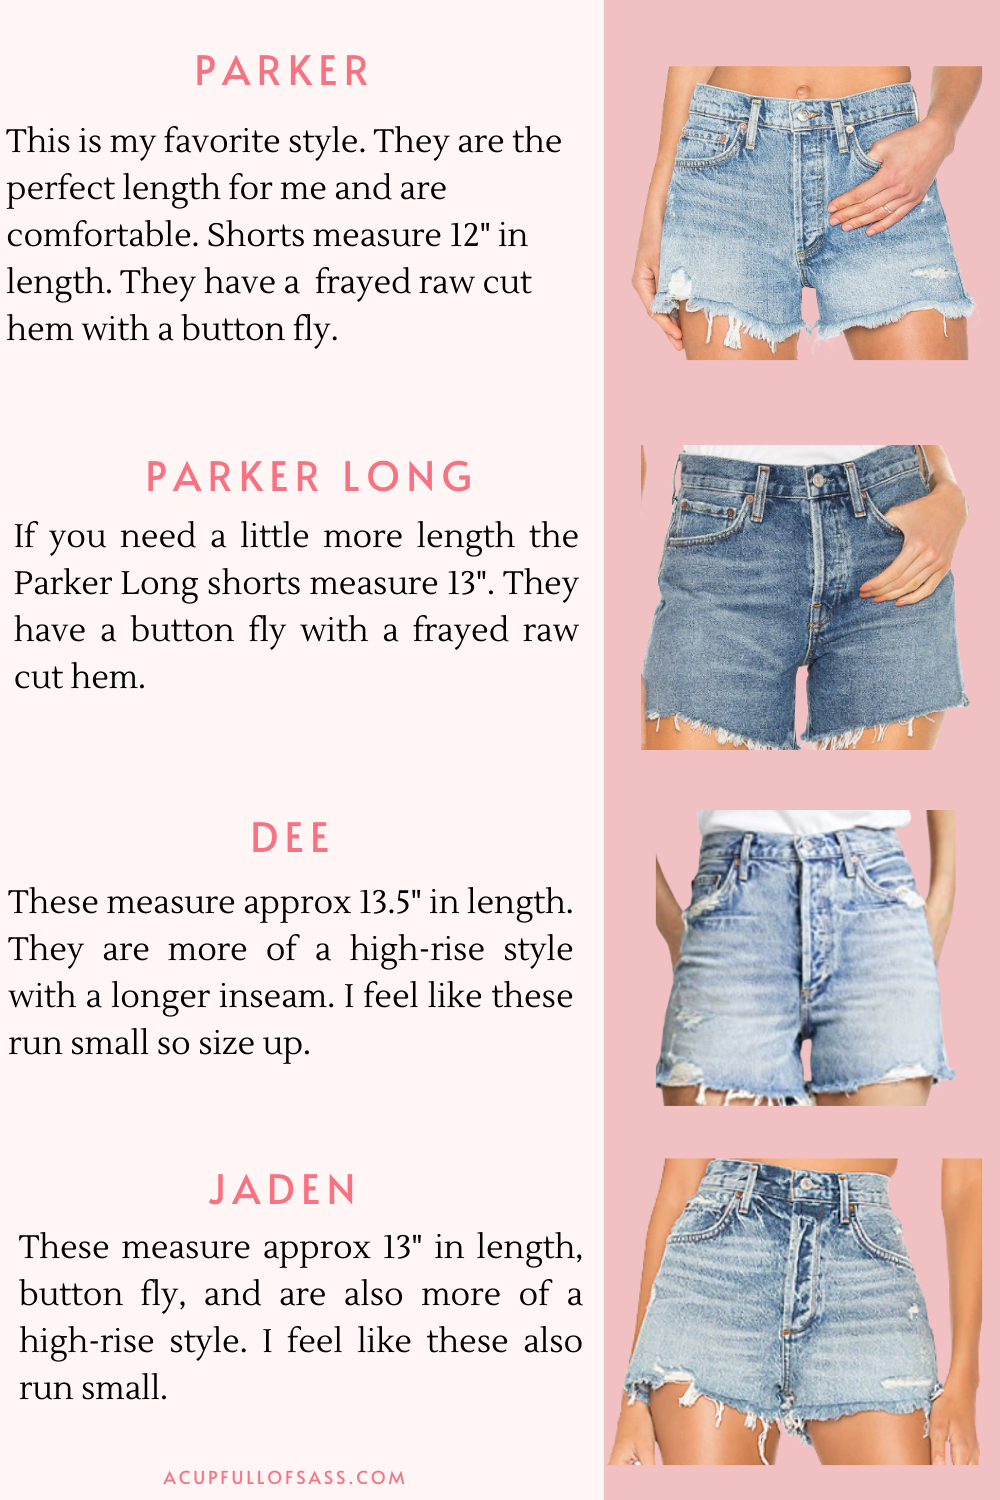 Summer shorts sizing review! ☀️ Full details in comments : r